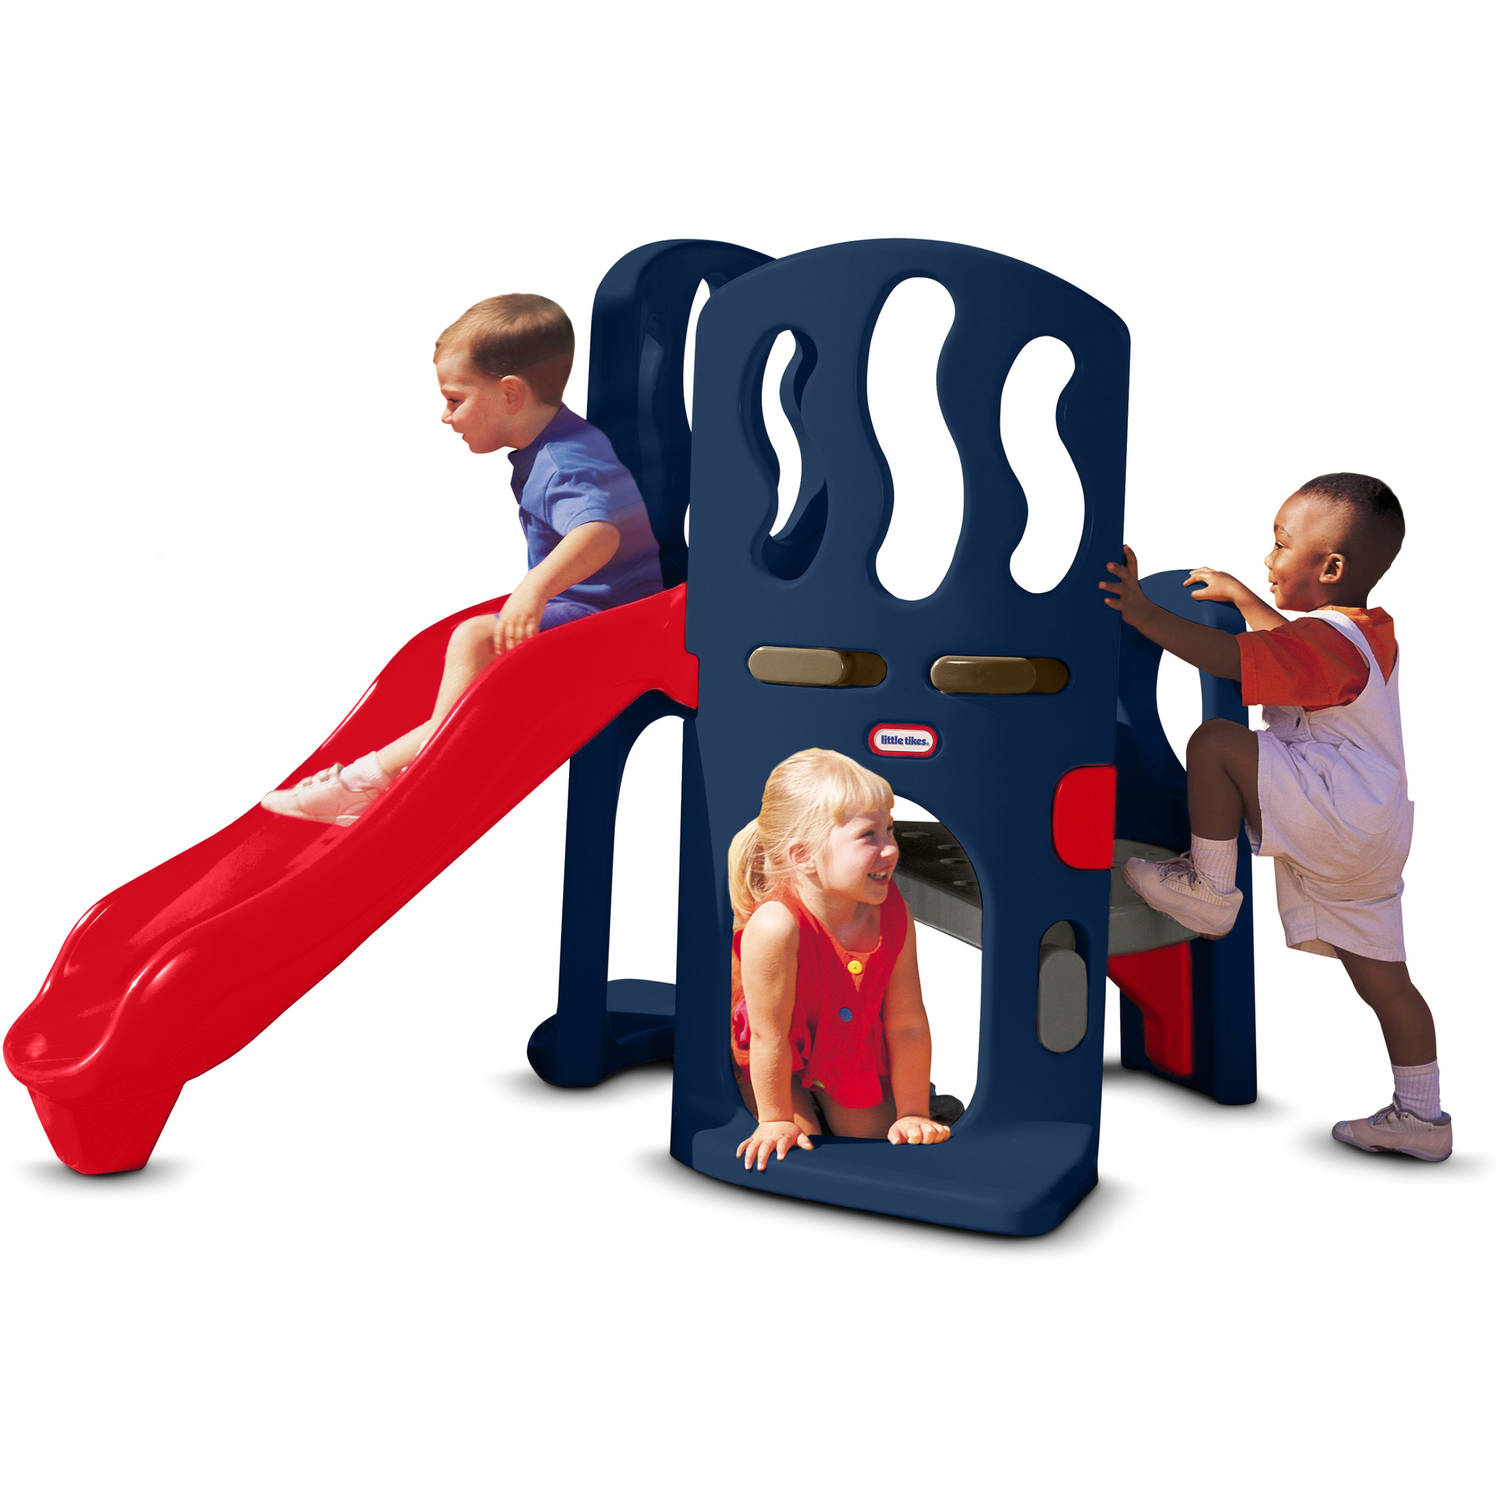 Little Tikes Hide & Slide Climber, Blue & Red - Climbing Toy and Slide for Kids Ages 2 to 6 - image 1 of 6